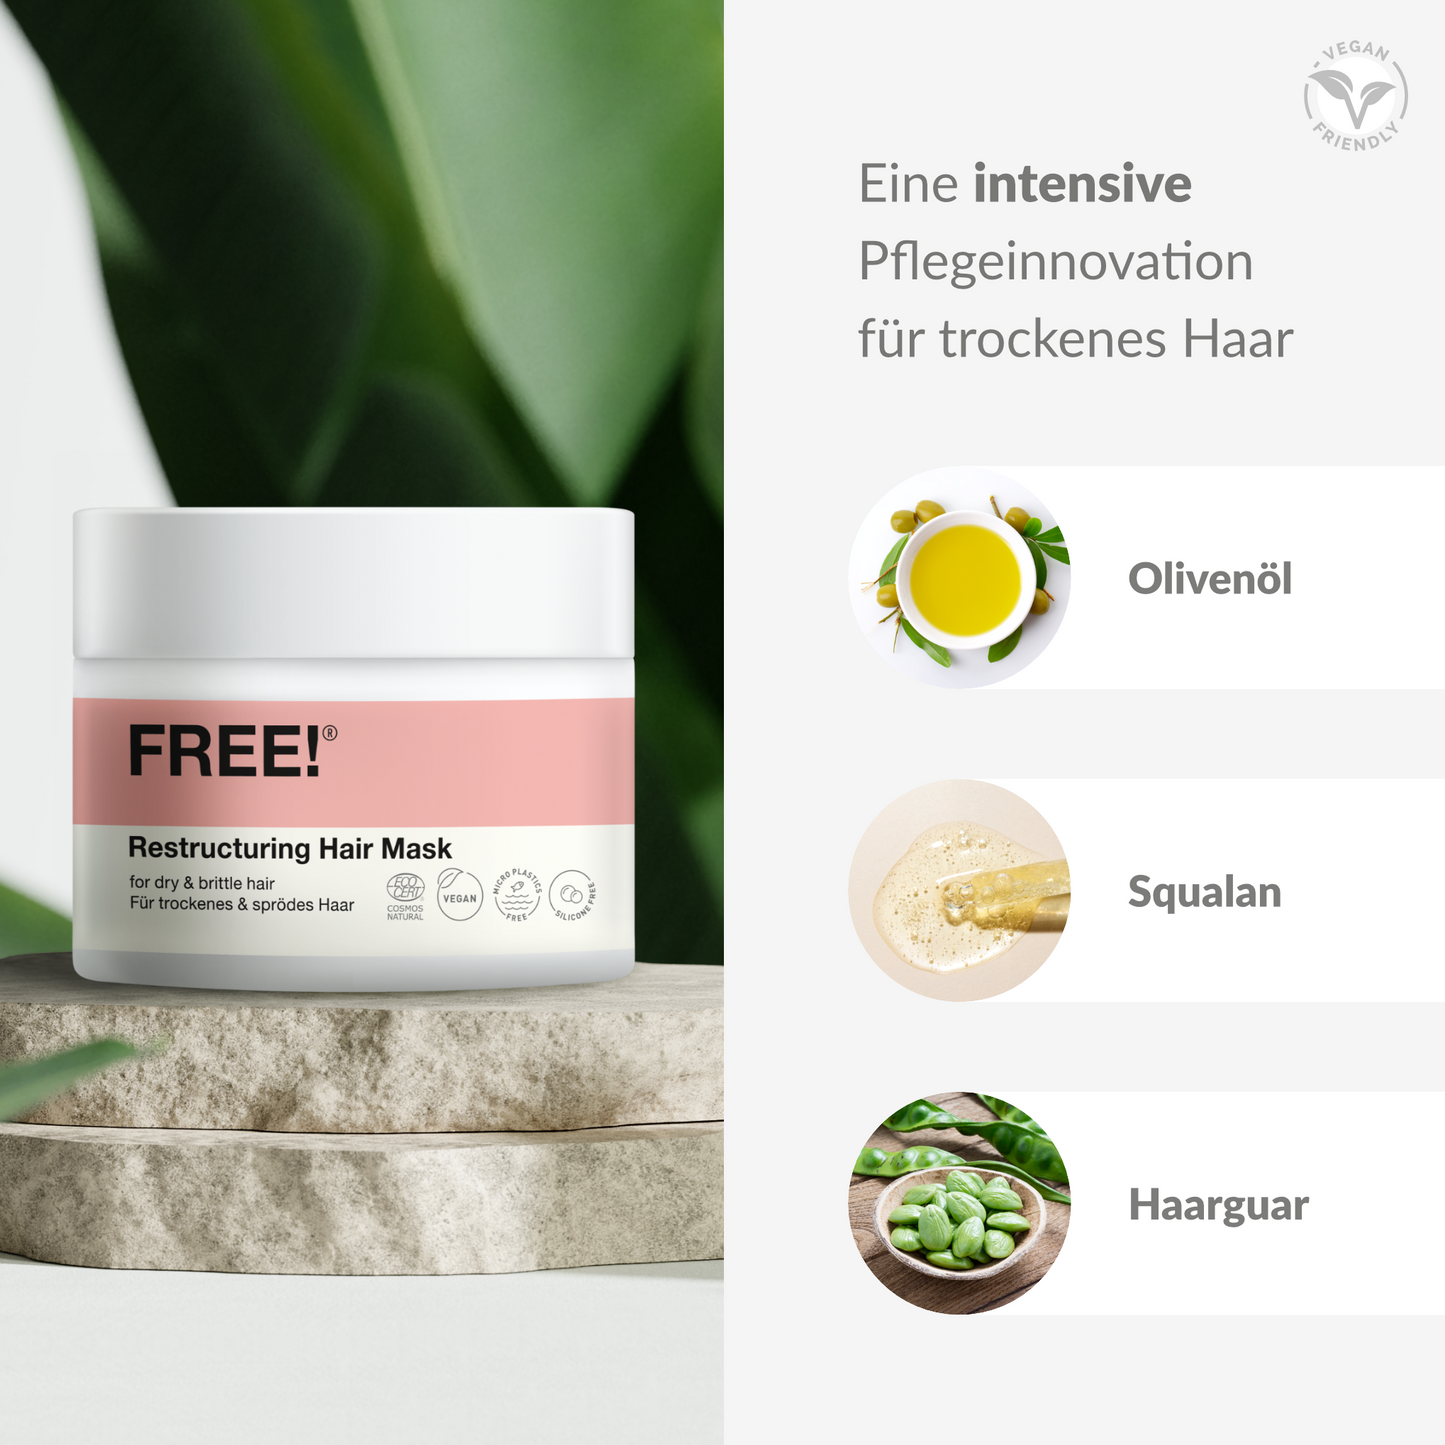 FREE! Restructuring Hair Mask repair & care